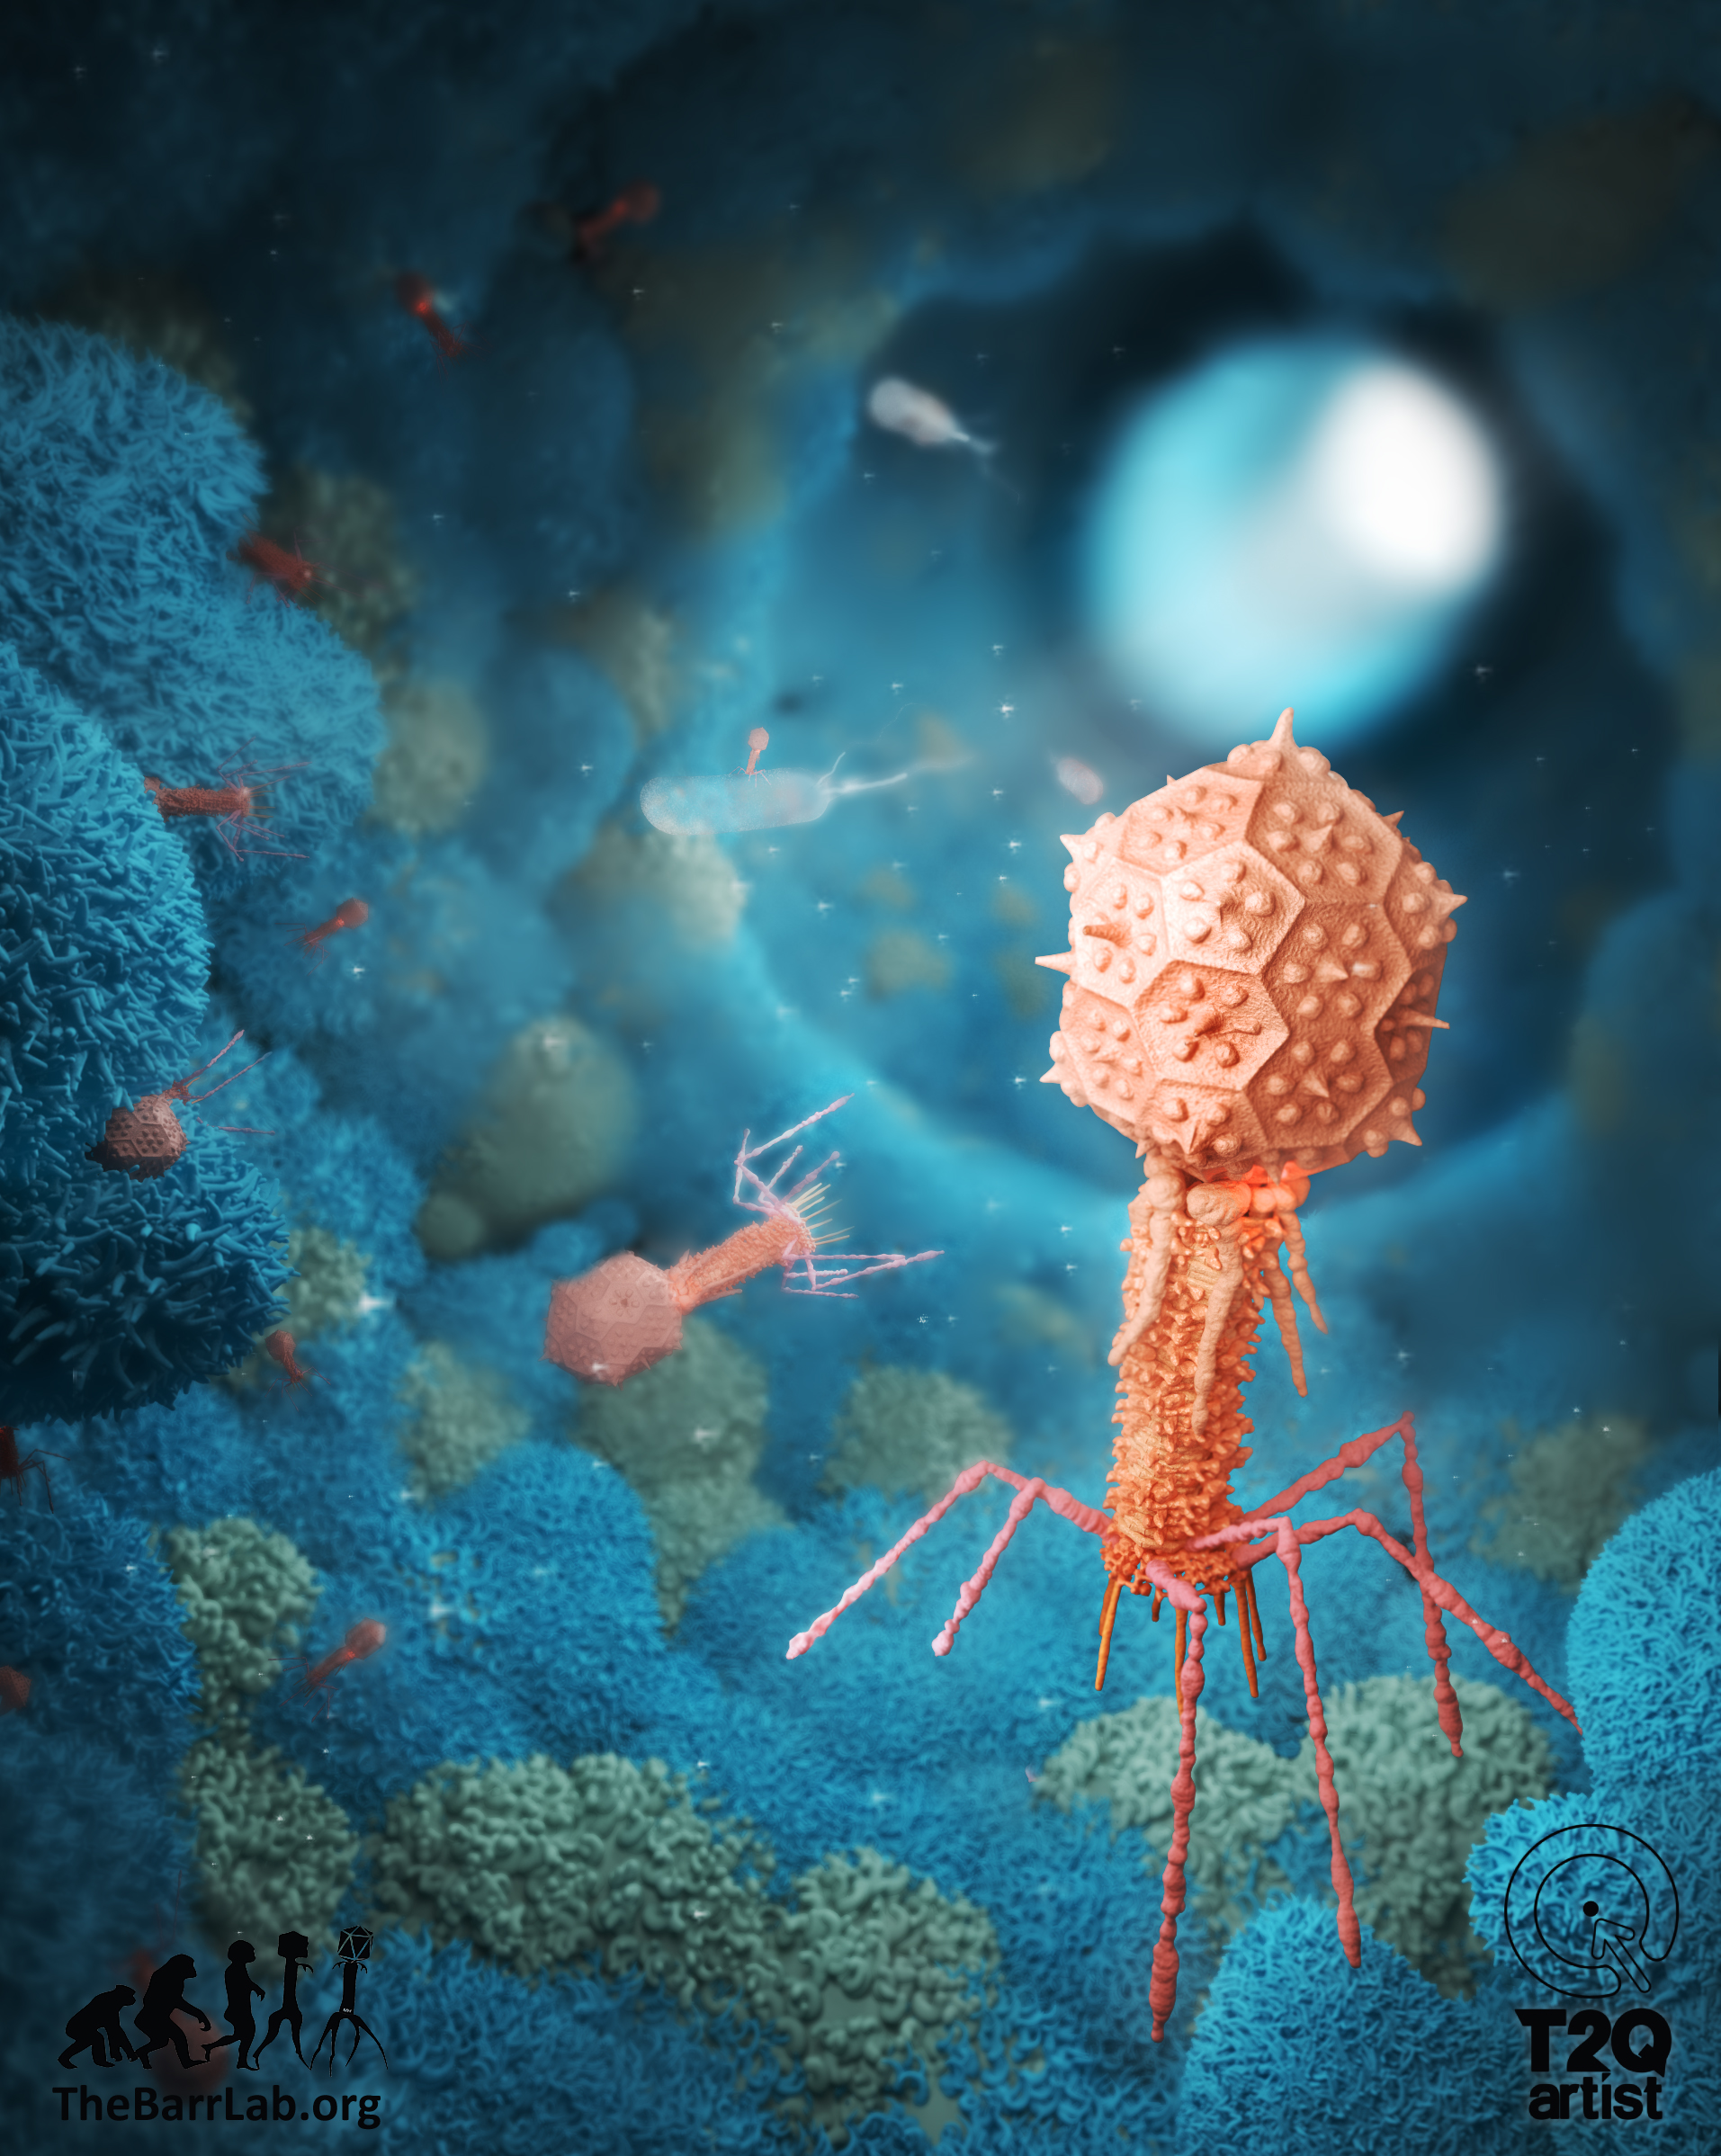 The average human body is estimated to absorb 31 billion bacteriophage particles every single day